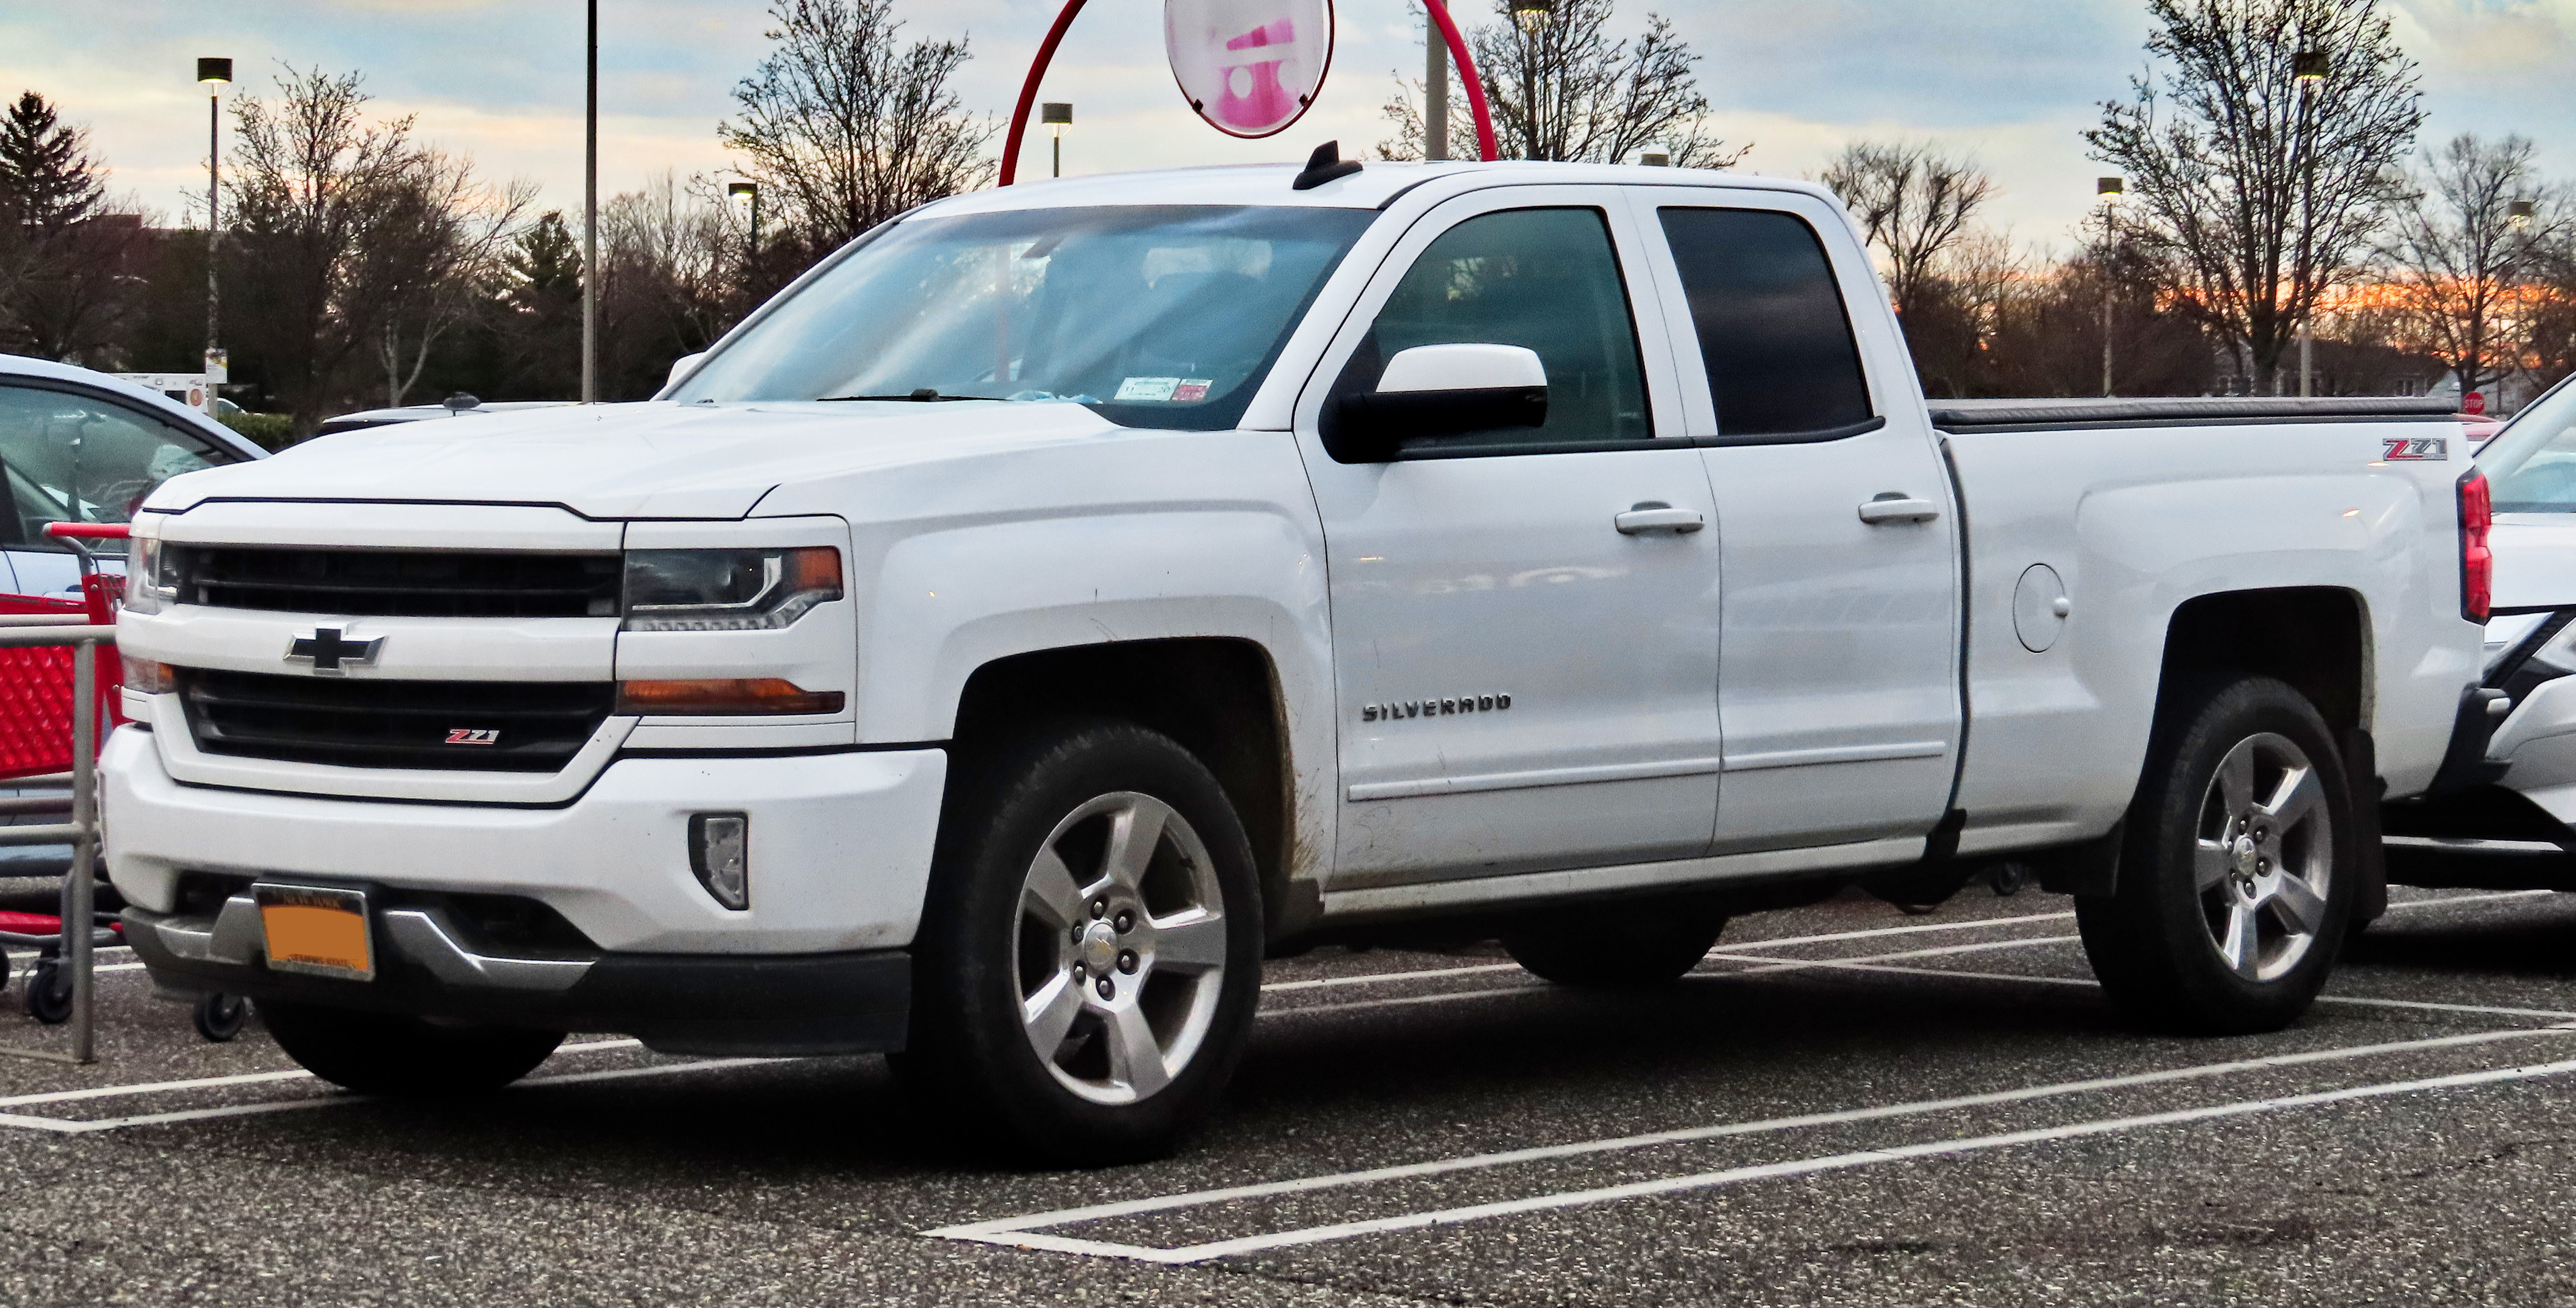 2020 Chevrolet Silverado 1500 Specifications, Pricing, Pictures and Videos